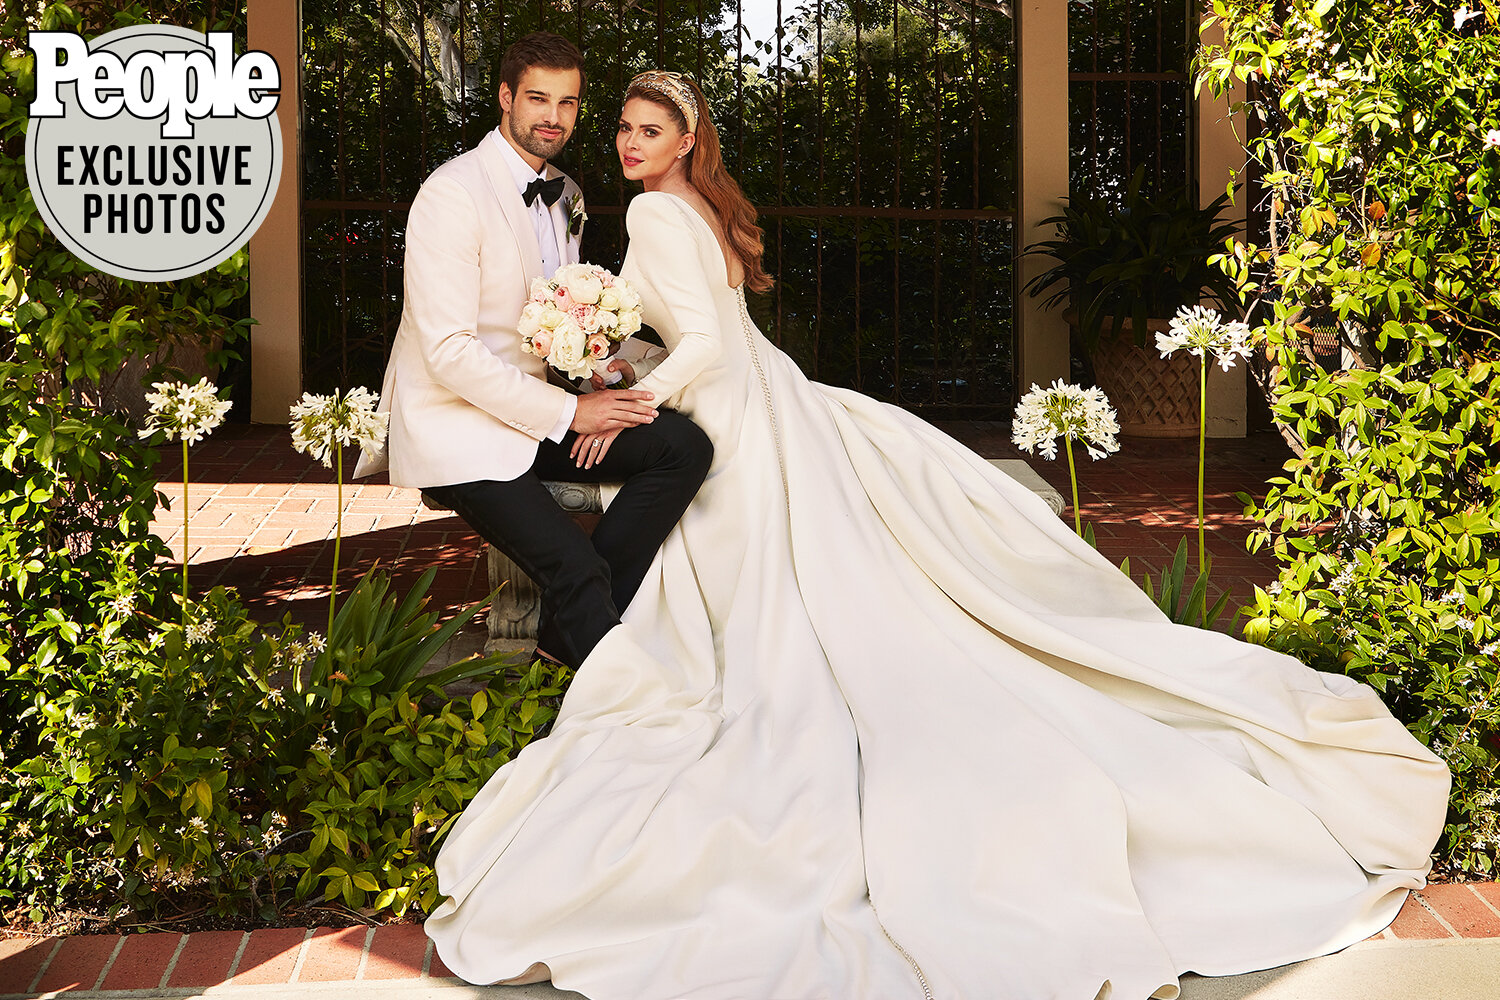 People Magazine | TV Host Carly Steel Is Married: All the Details from Her Intimate Wedding